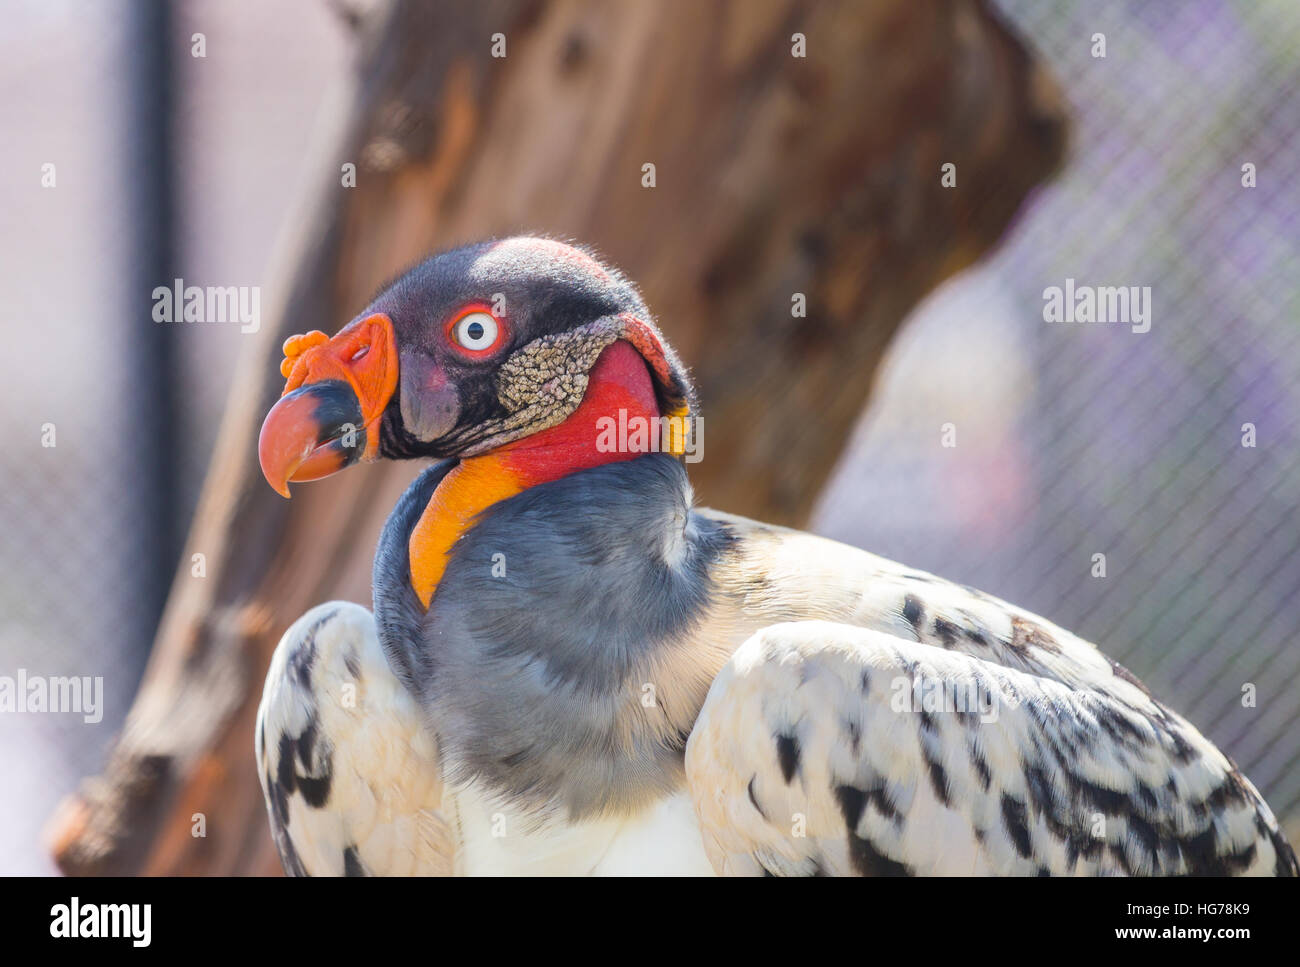 King Vulture, a very highly colored bird. Stock Photo